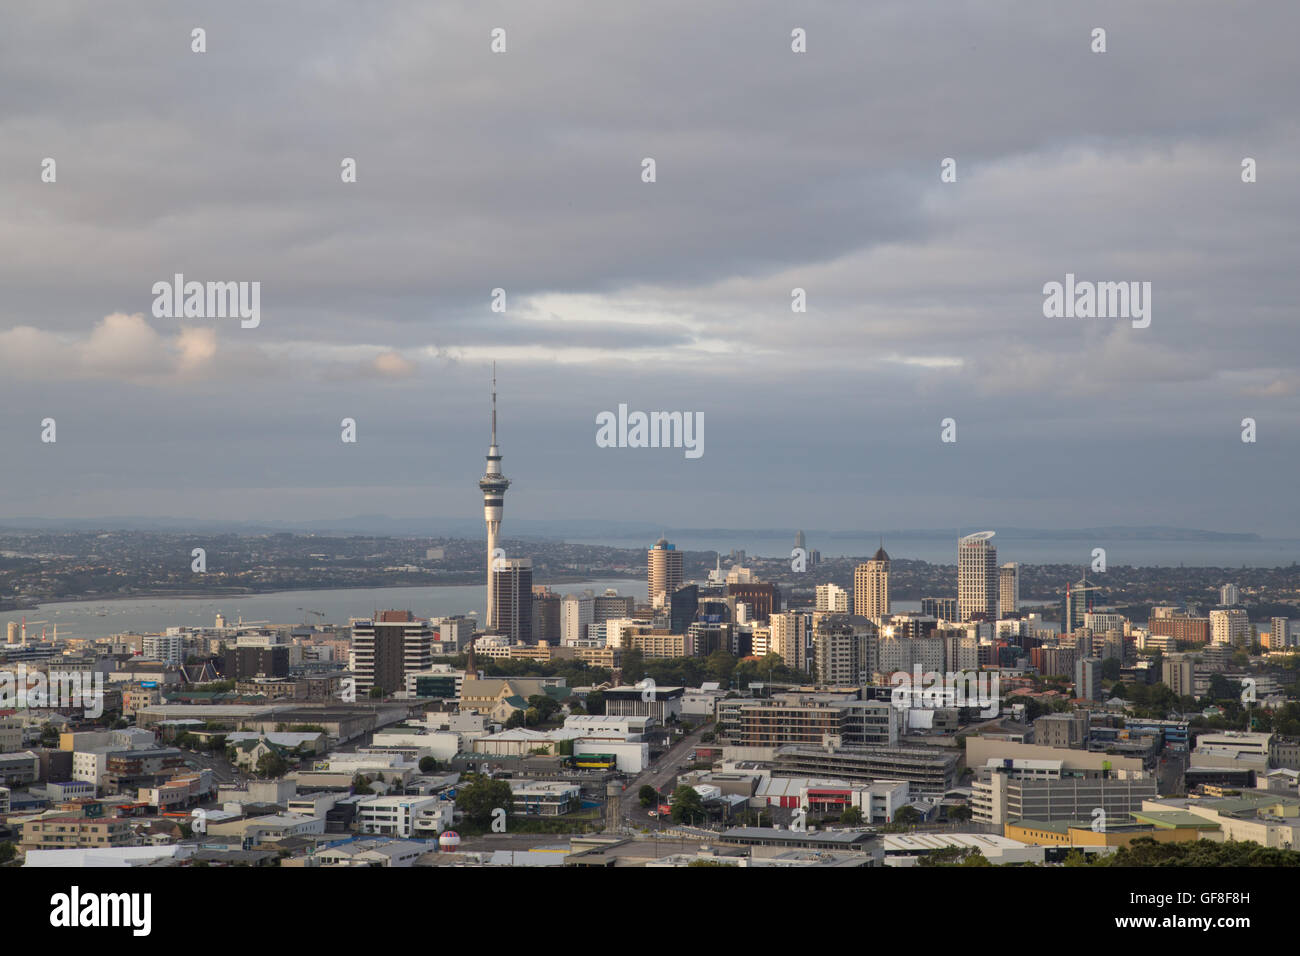 Auckland, New Zealand - February 8, 2015: View of the city skyline as seen from Mount Eden Stock Photo